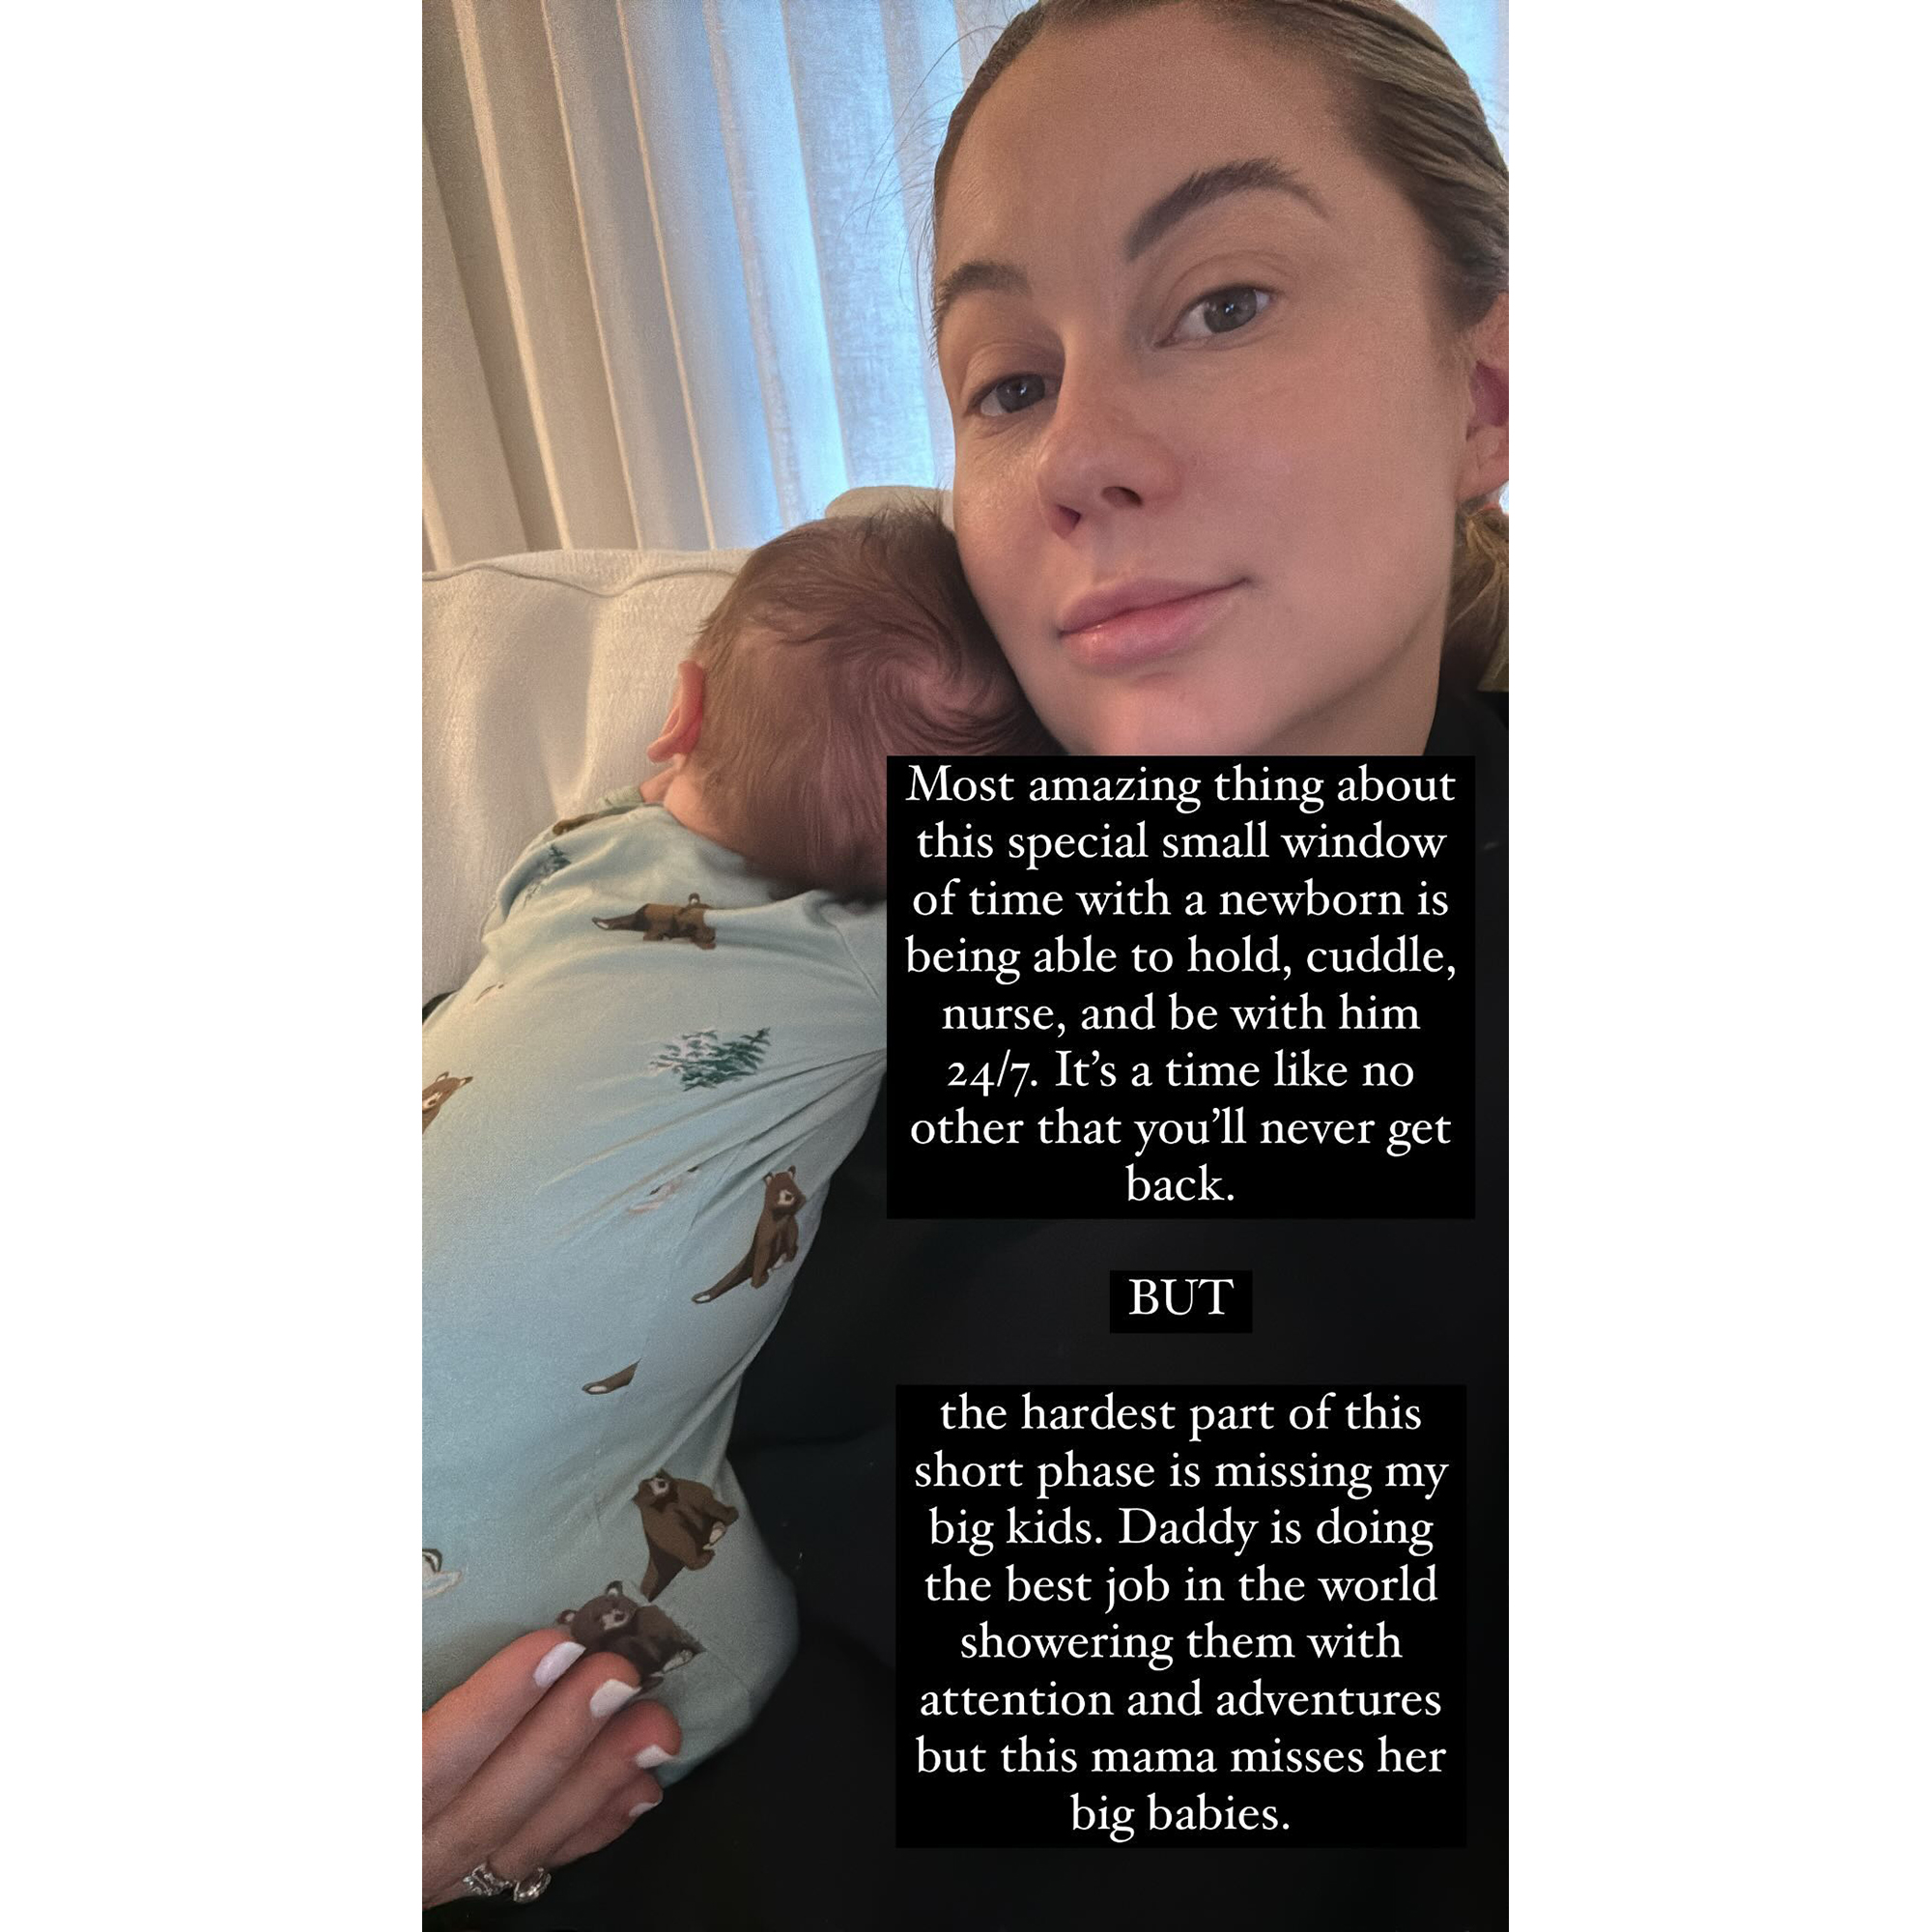 Shawn Johnson ‘Misses Her Big Babies’ as She Tends to Newborn Son